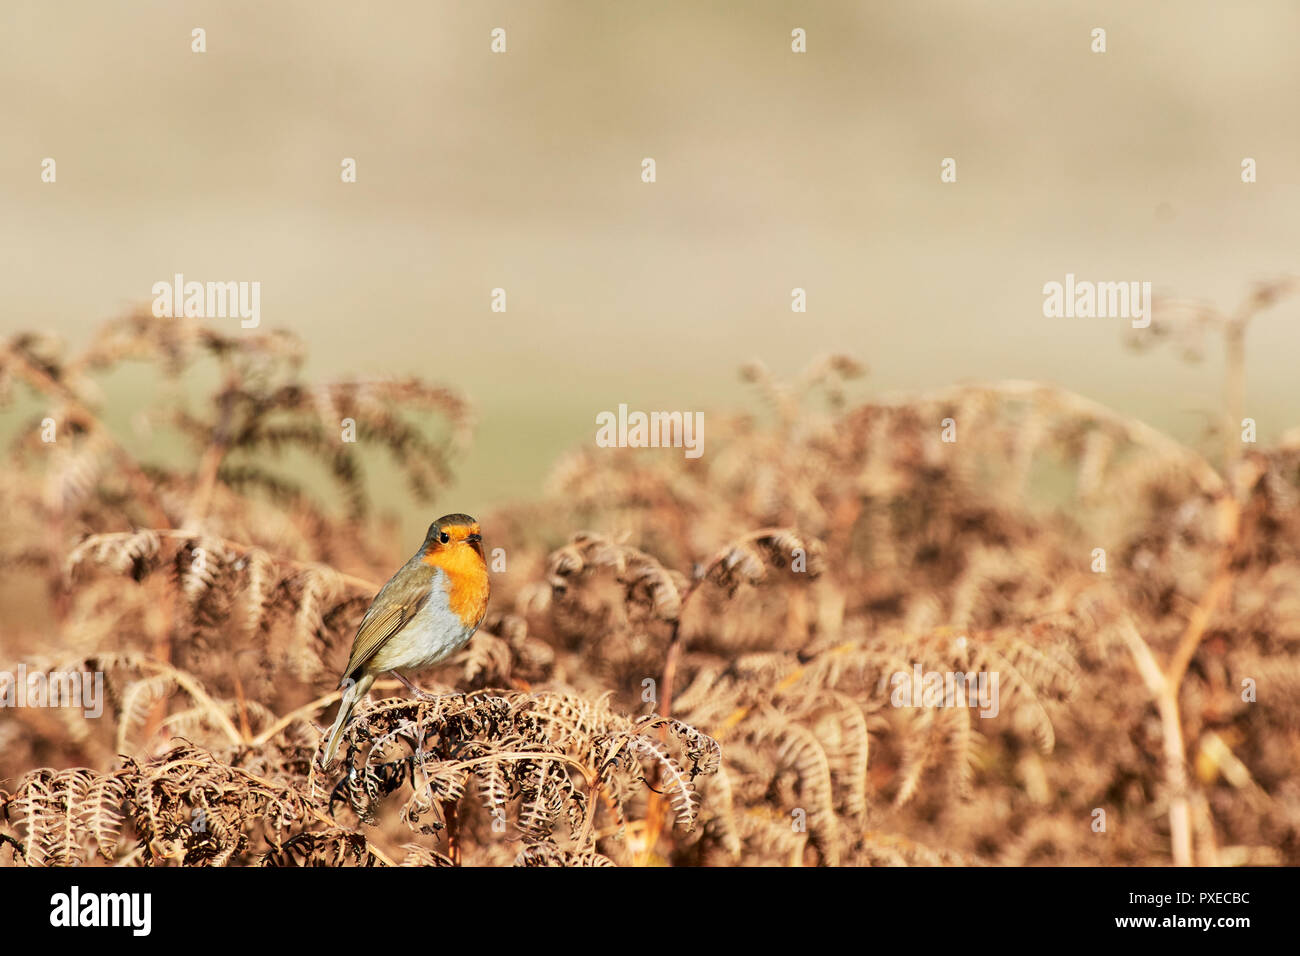 Ogmore By Sea, Wales, UK. 22nd Oct, 2018. A Robin (Erithacus rubecula) perches on rust coloured bracken and bathes in the warm Autumnal sun, Ogmore By Sea UK. Credit: Phillip Thomas/Alamy Live News Stock Photo